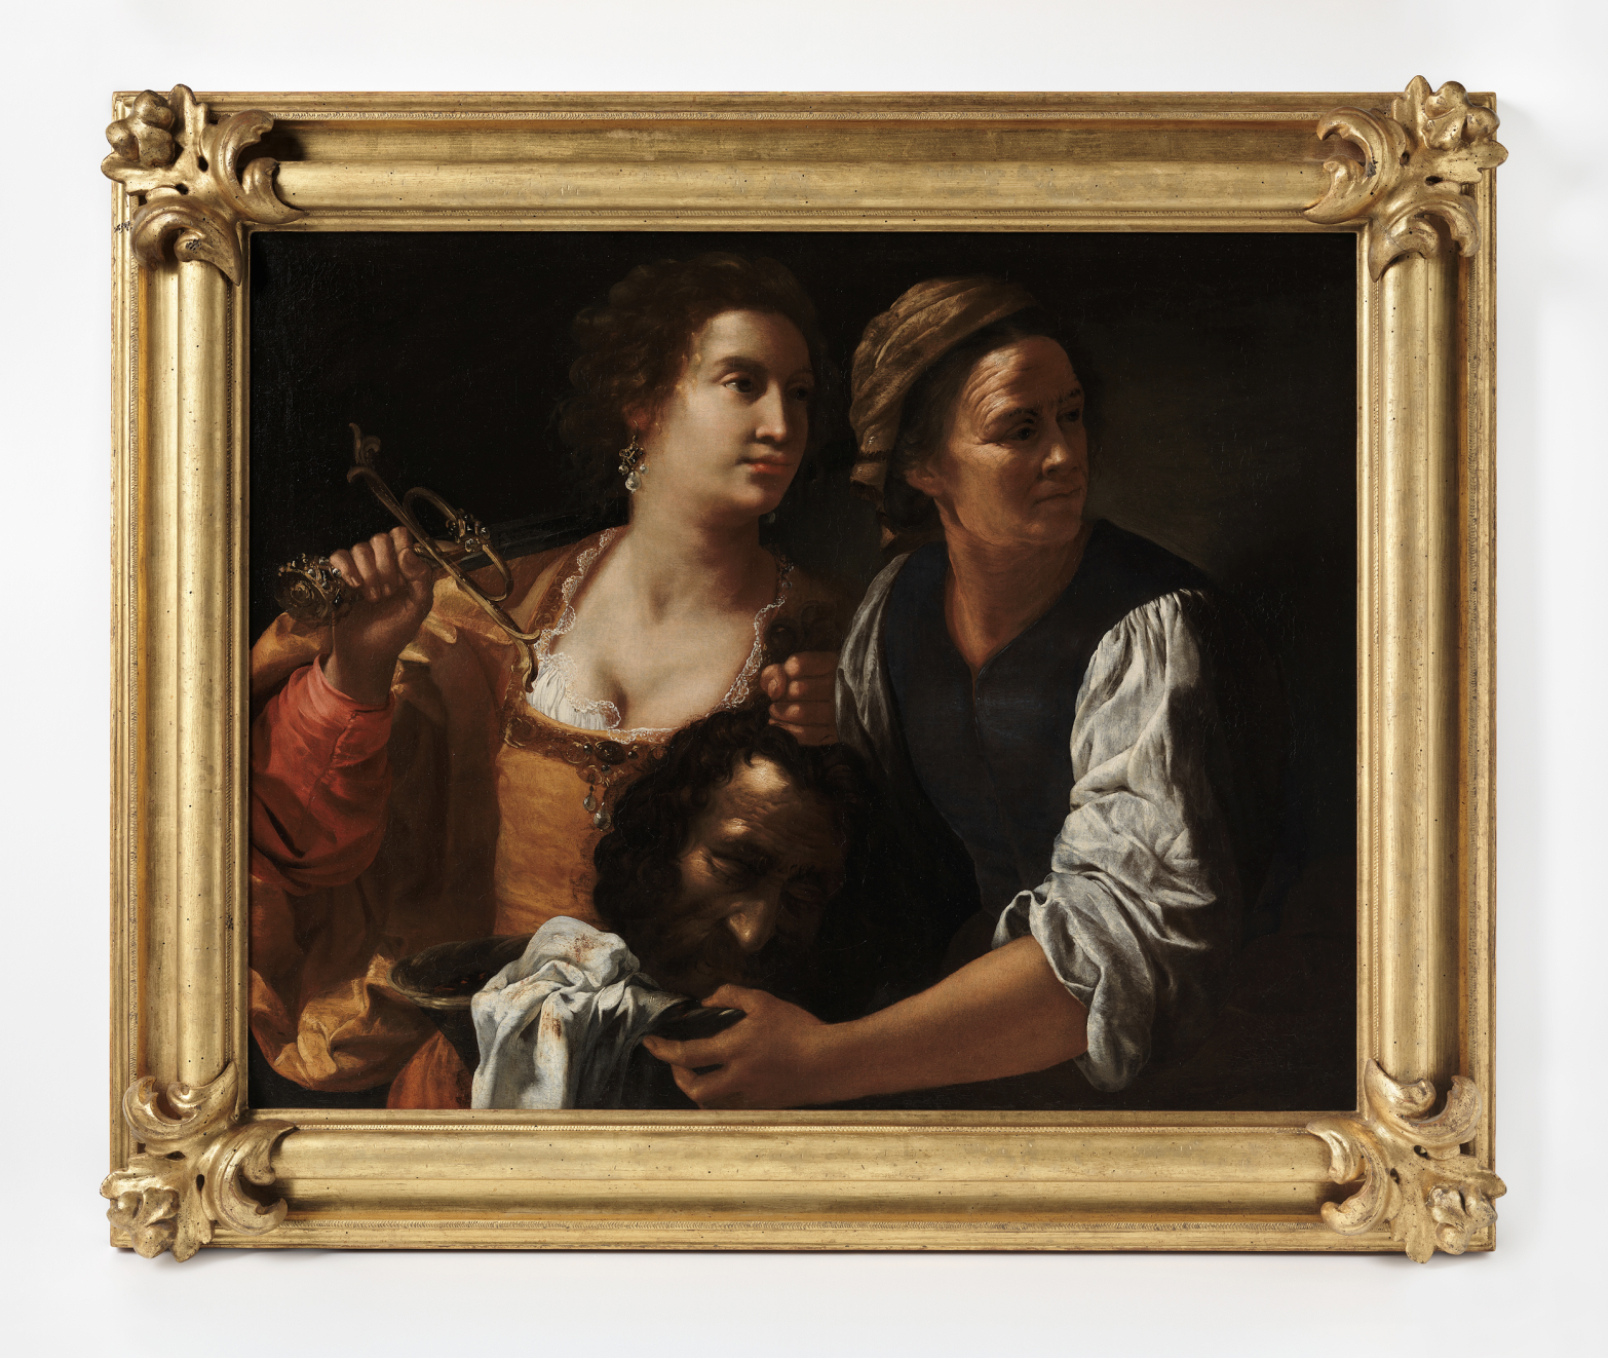 An oil painting shows two women with a light skin tone. The dark background contrasts the light complexion of the woman on the left, who is holding a sword over her shouler in one hand, and a man’s head in the other. 